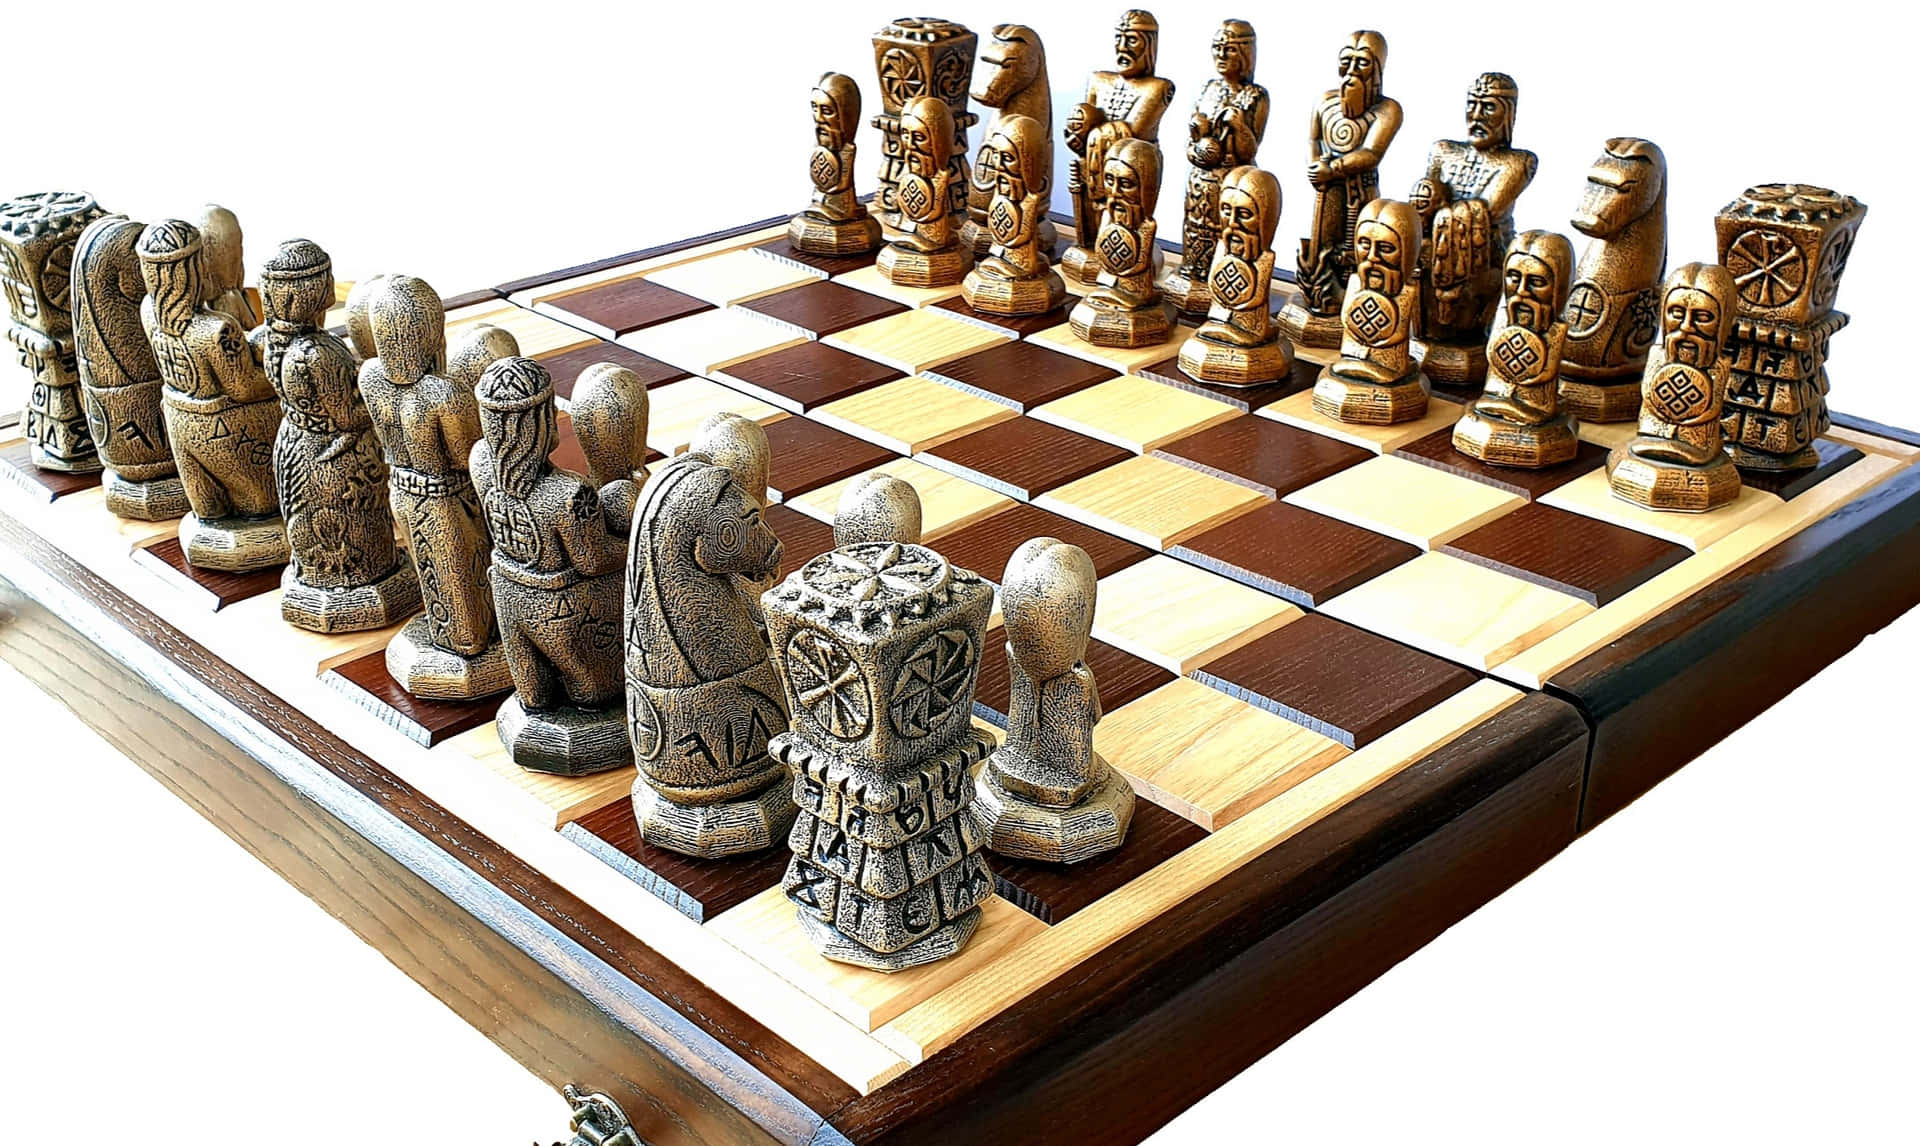 Play Your Strategic Moves On The Chessboard Background